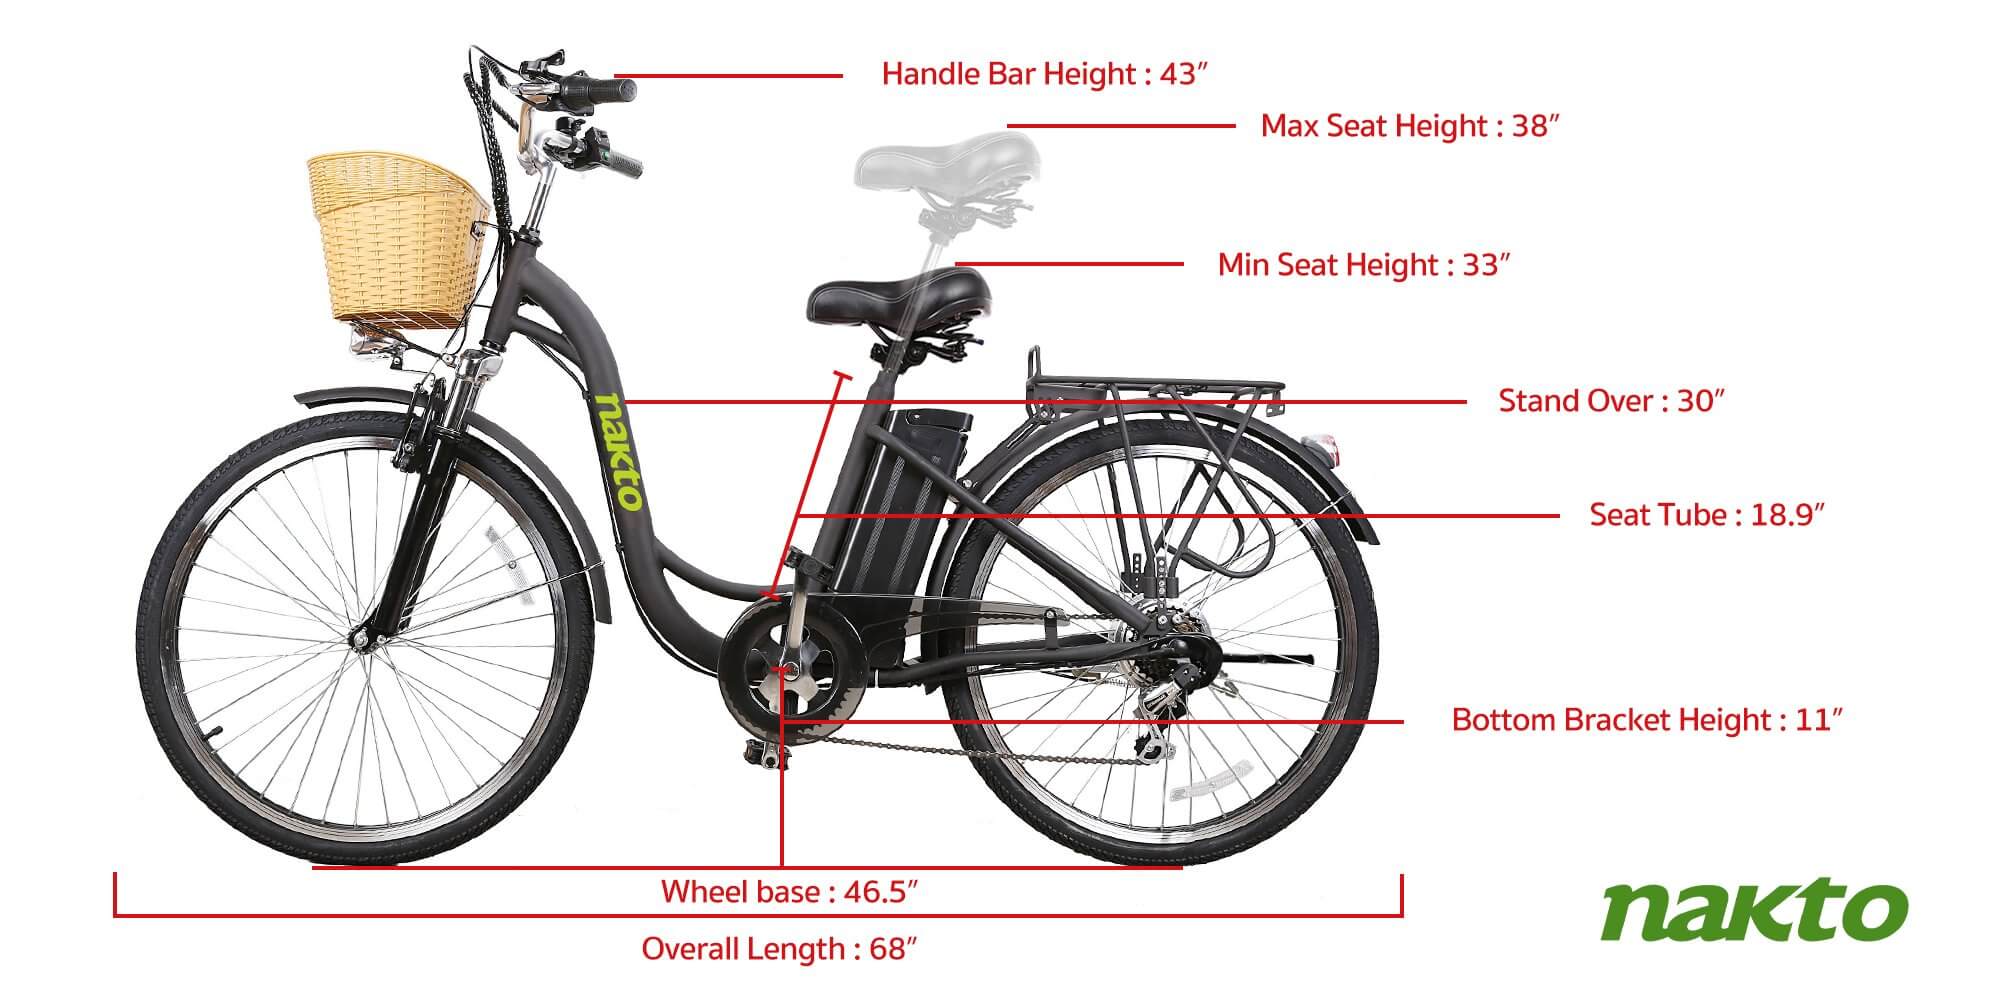 Nakto CAMEL Electric Bike for Women 6 Speed 26" Tire City eBike with Basket Black 36V 10Ah 250W/350W Motor Electric Bicycle